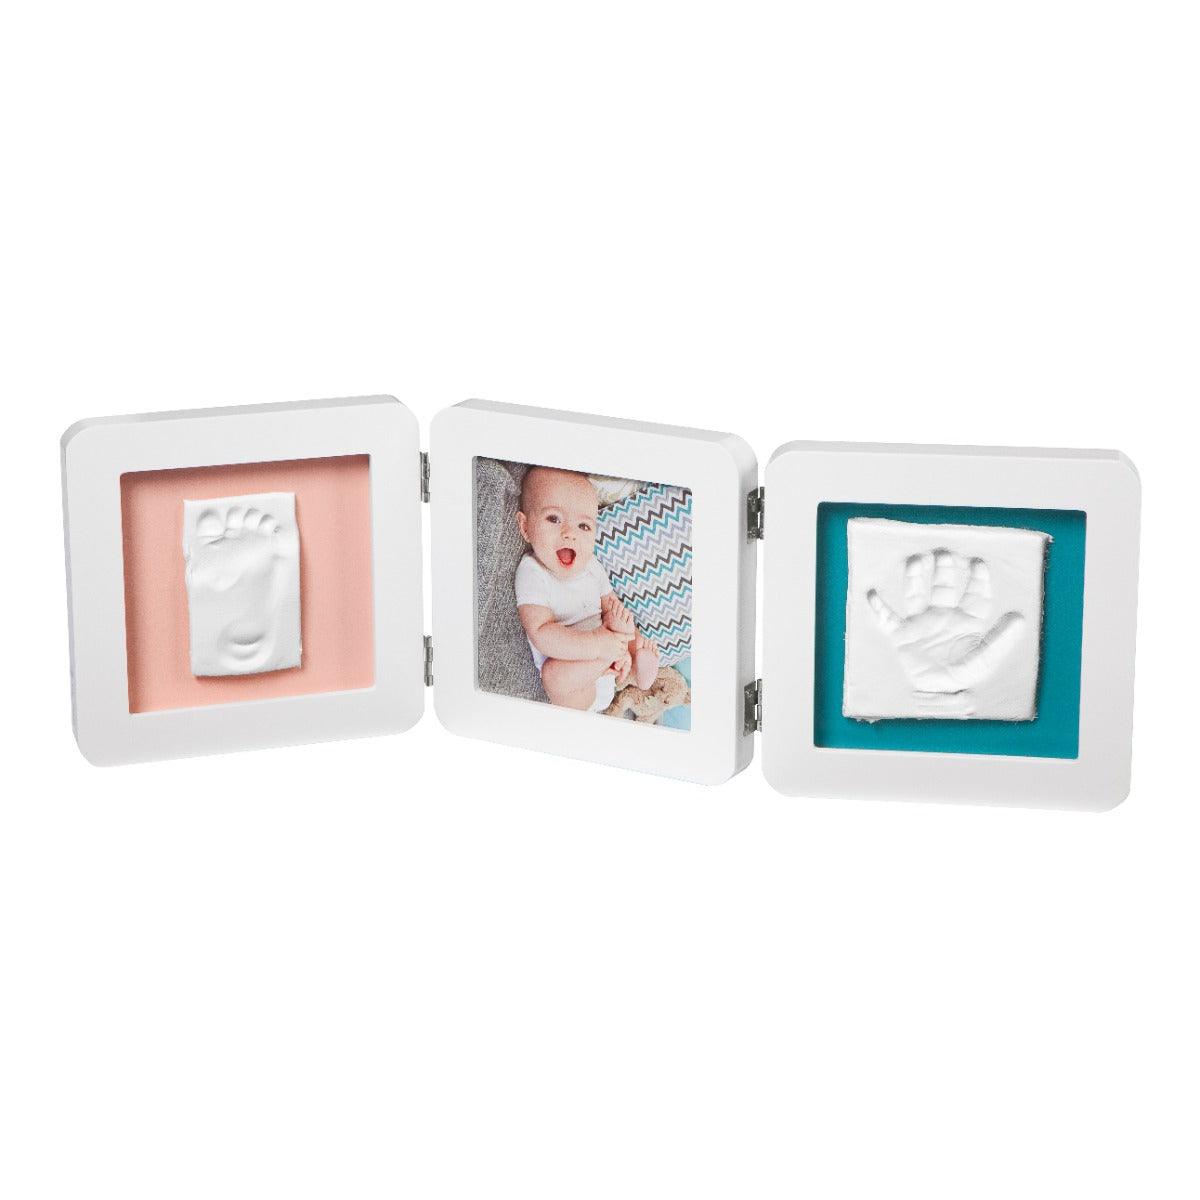 Baby Art My Baby Touch 2 Nursery D‚àö¬©cor White - First Print With Photo Frame For Ages 0-3 Years